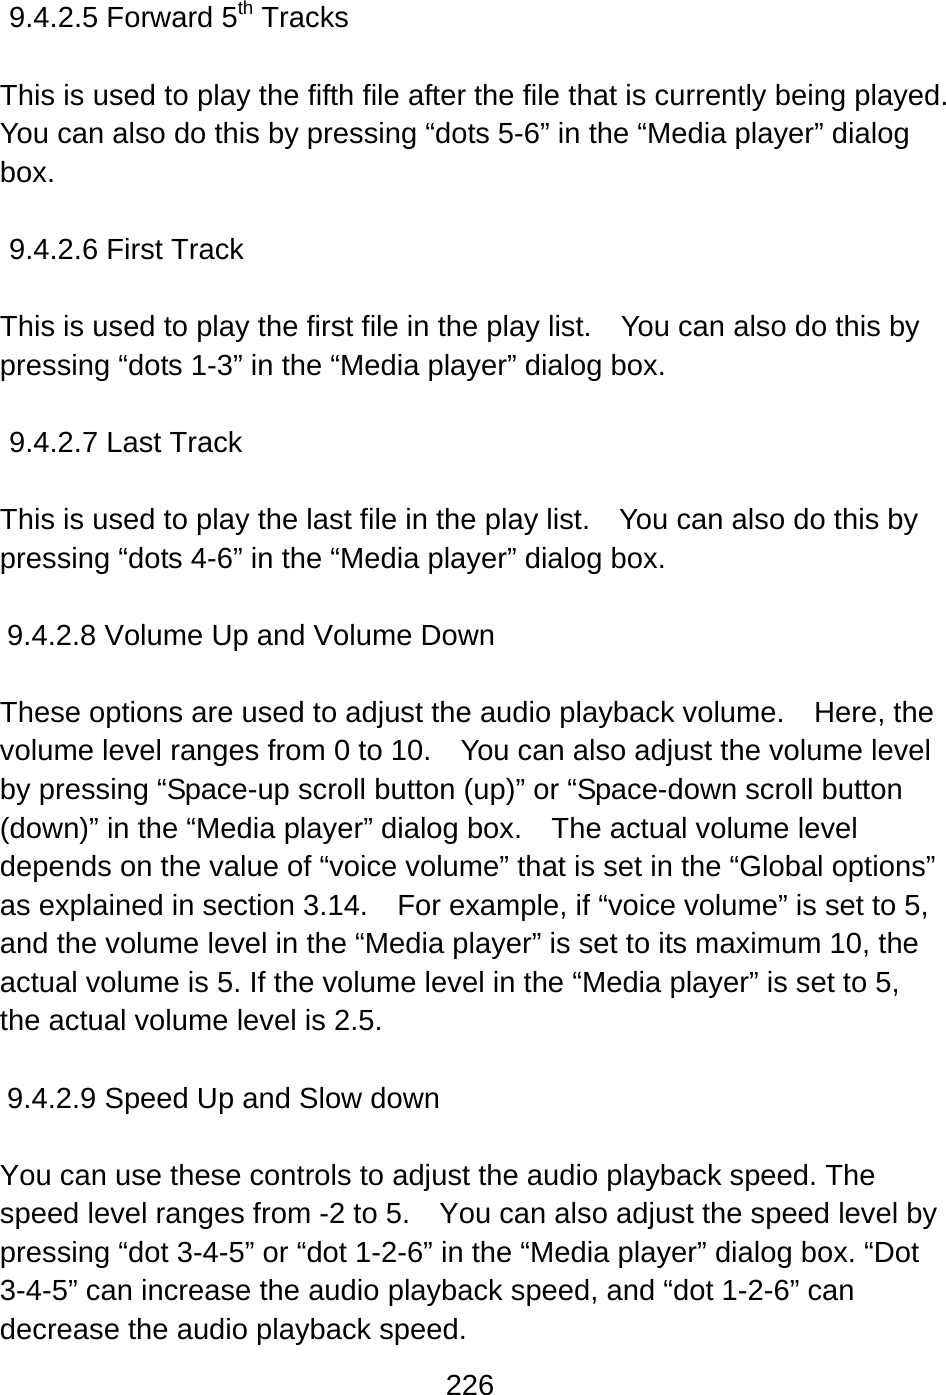 226   9.4.2.5 Forward 5th Tracks  This is used to play the fifth file after the file that is currently being played.   You can also do this by pressing “dots 5-6” in the “Media player” dialog box.  9.4.2.6 First Track  This is used to play the first file in the play list.    You can also do this by pressing “dots 1-3” in the “Media player” dialog box.  9.4.2.7 Last Track    This is used to play the last file in the play list.    You can also do this by pressing “dots 4-6” in the “Media player” dialog box.  9.4.2.8 Volume Up and Volume Down  These options are used to adjust the audio playback volume.    Here, the volume level ranges from 0 to 10.    You can also adjust the volume level by pressing “Space-up scroll button (up)” or “Space-down scroll button (down)” in the “Media player” dialog box.    The actual volume level depends on the value of “voice volume” that is set in the “Global options” as explained in section 3.14.    For example, if “voice volume” is set to 5, and the volume level in the “Media player” is set to its maximum 10, the actual volume is 5. If the volume level in the “Media player” is set to 5, the actual volume level is 2.5.  9.4.2.9 Speed Up and Slow down  You can use these controls to adjust the audio playback speed. The speed level ranges from -2 to 5.    You can also adjust the speed level by pressing “dot 3-4-5” or “dot 1-2-6” in the “Media player” dialog box. “Dot 3-4-5” can increase the audio playback speed, and “dot 1-2-6” can decrease the audio playback speed. 